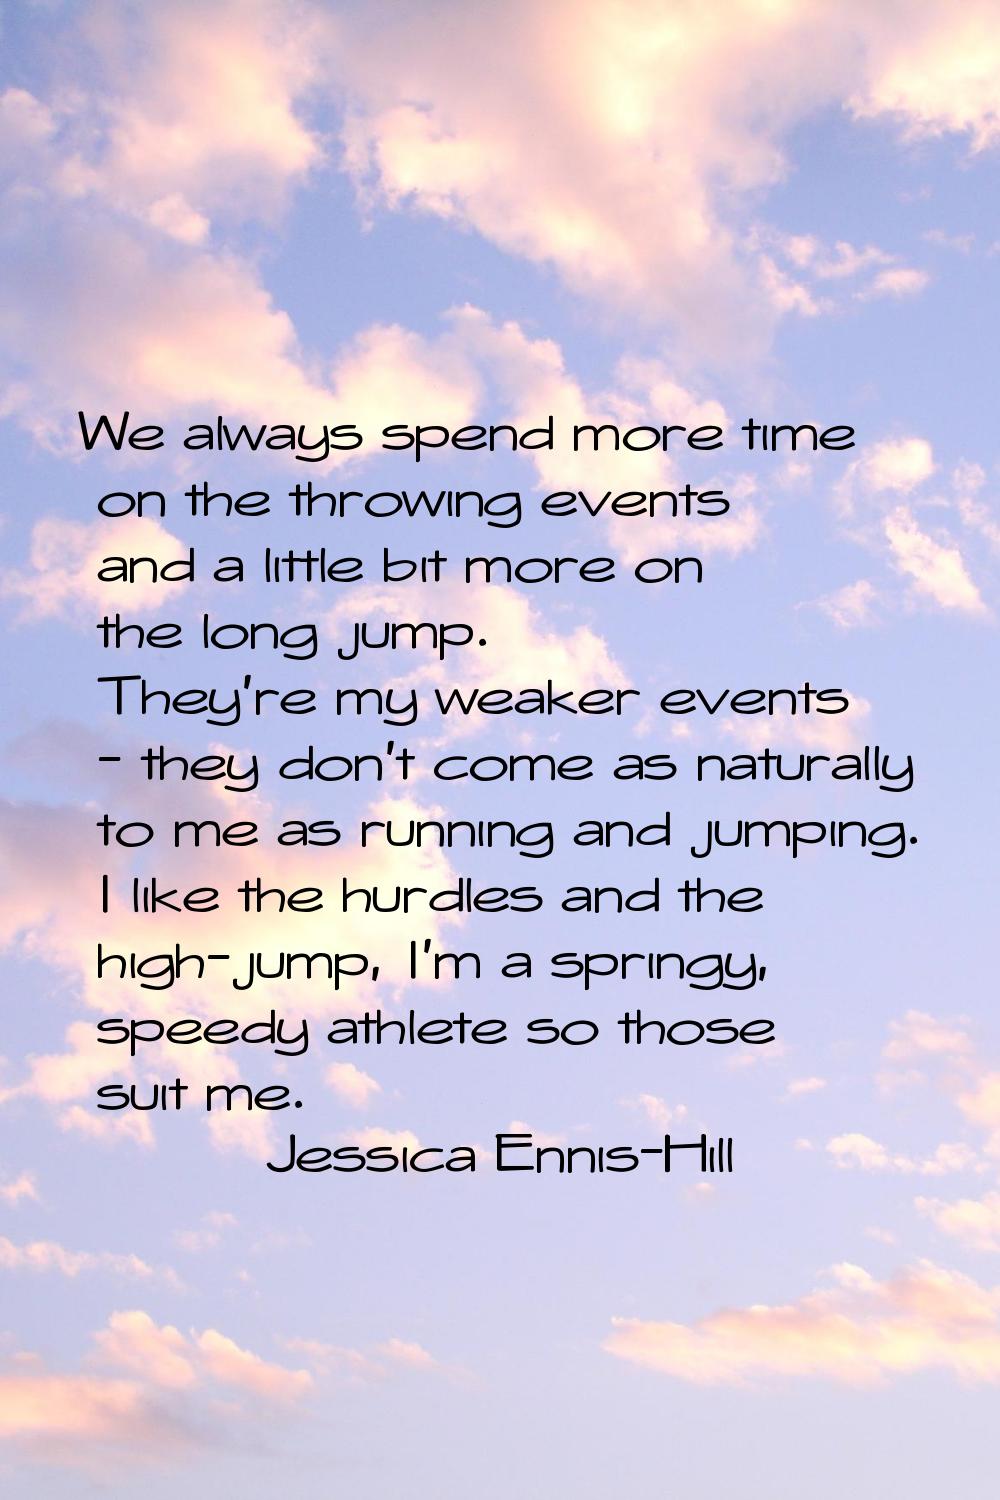 We always spend more time on the throwing events and a little bit more on the long jump. They're my